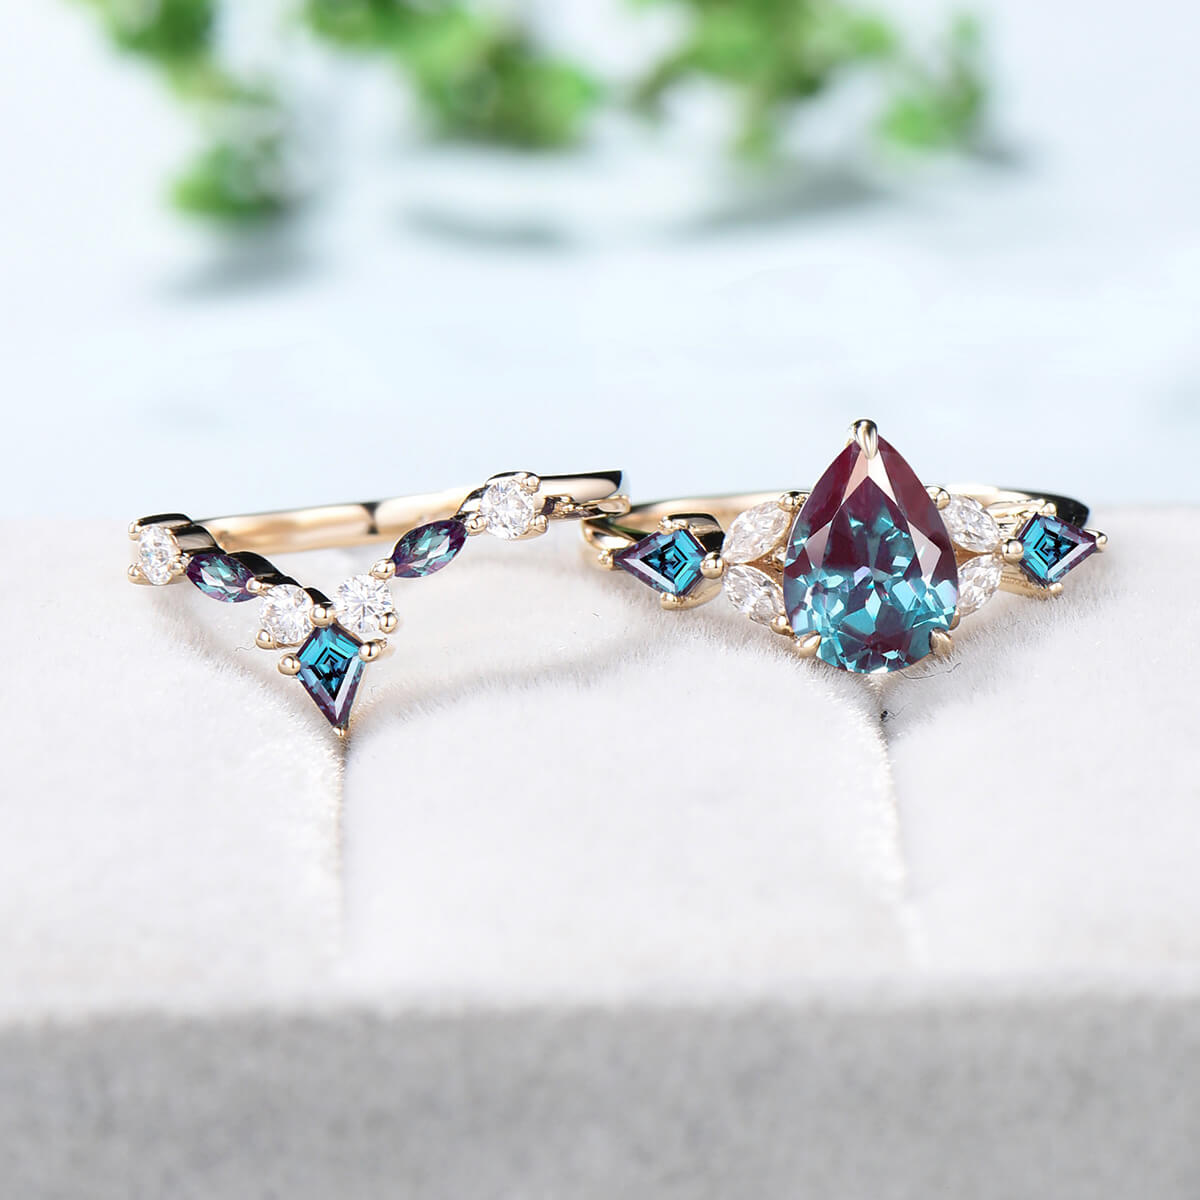 2pcs Vintage Pear shaped alexandrite engagement ring set 14 yellow gold cluster kite marquise alexandrite wedding ring set for women - PENFINE